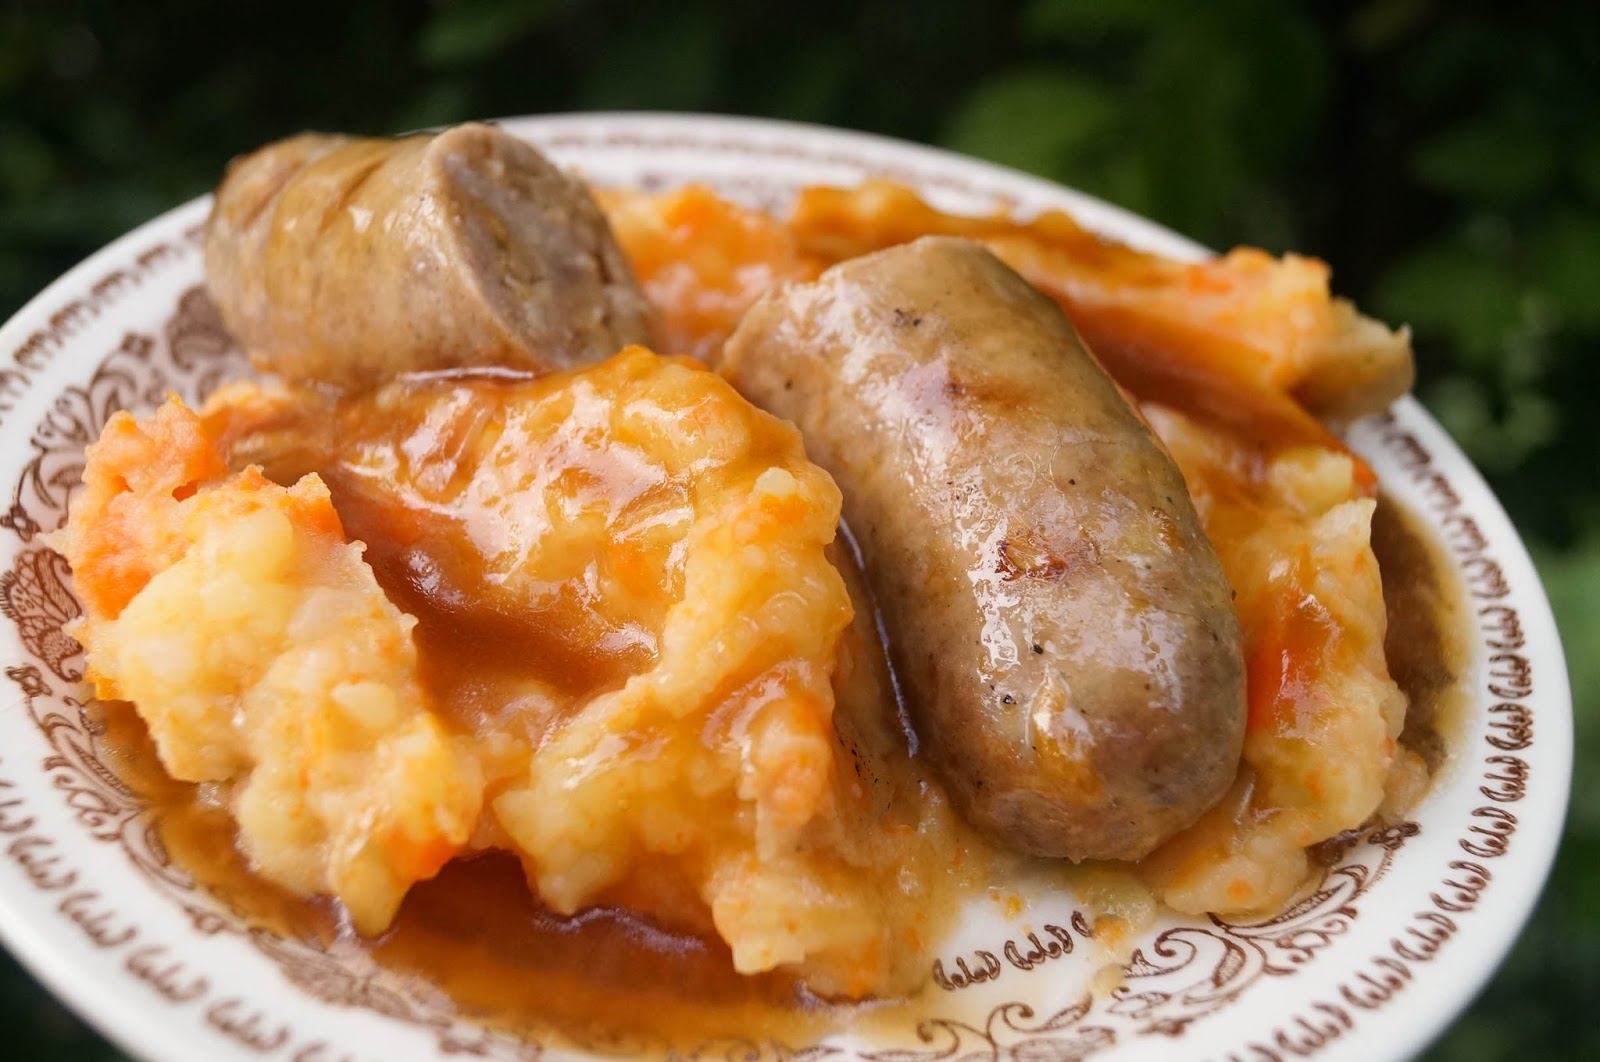 In the Kitchen with Jenny: Hutspot met Wurst en Jus (Hotchpotch with Wurst  and Gravy)